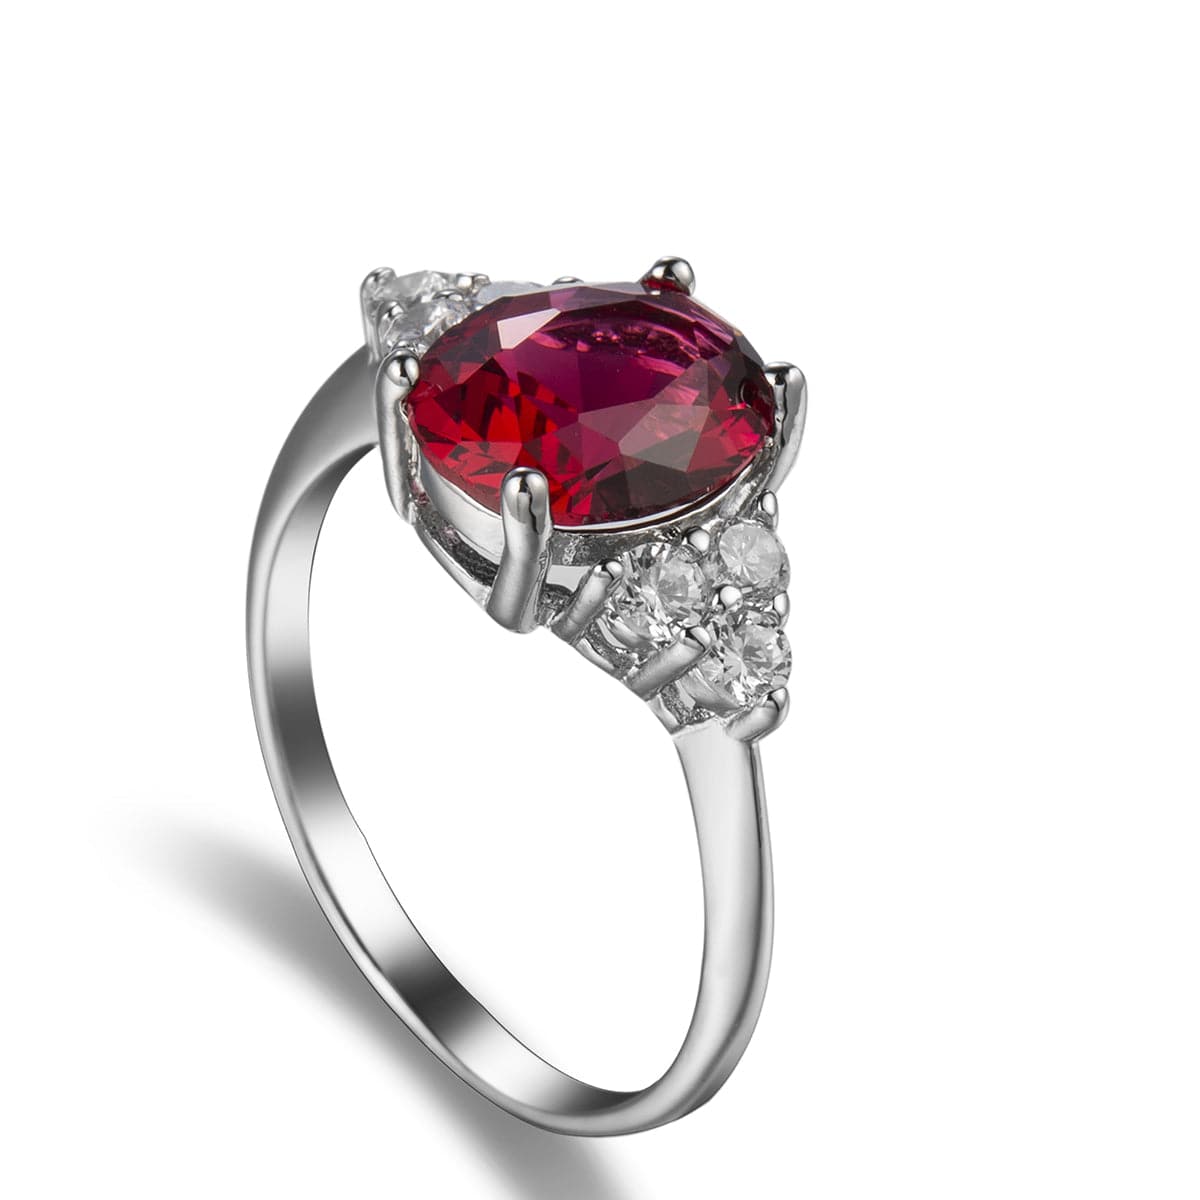 Rose Crystal & Cubic Zirconia Triangle Ring